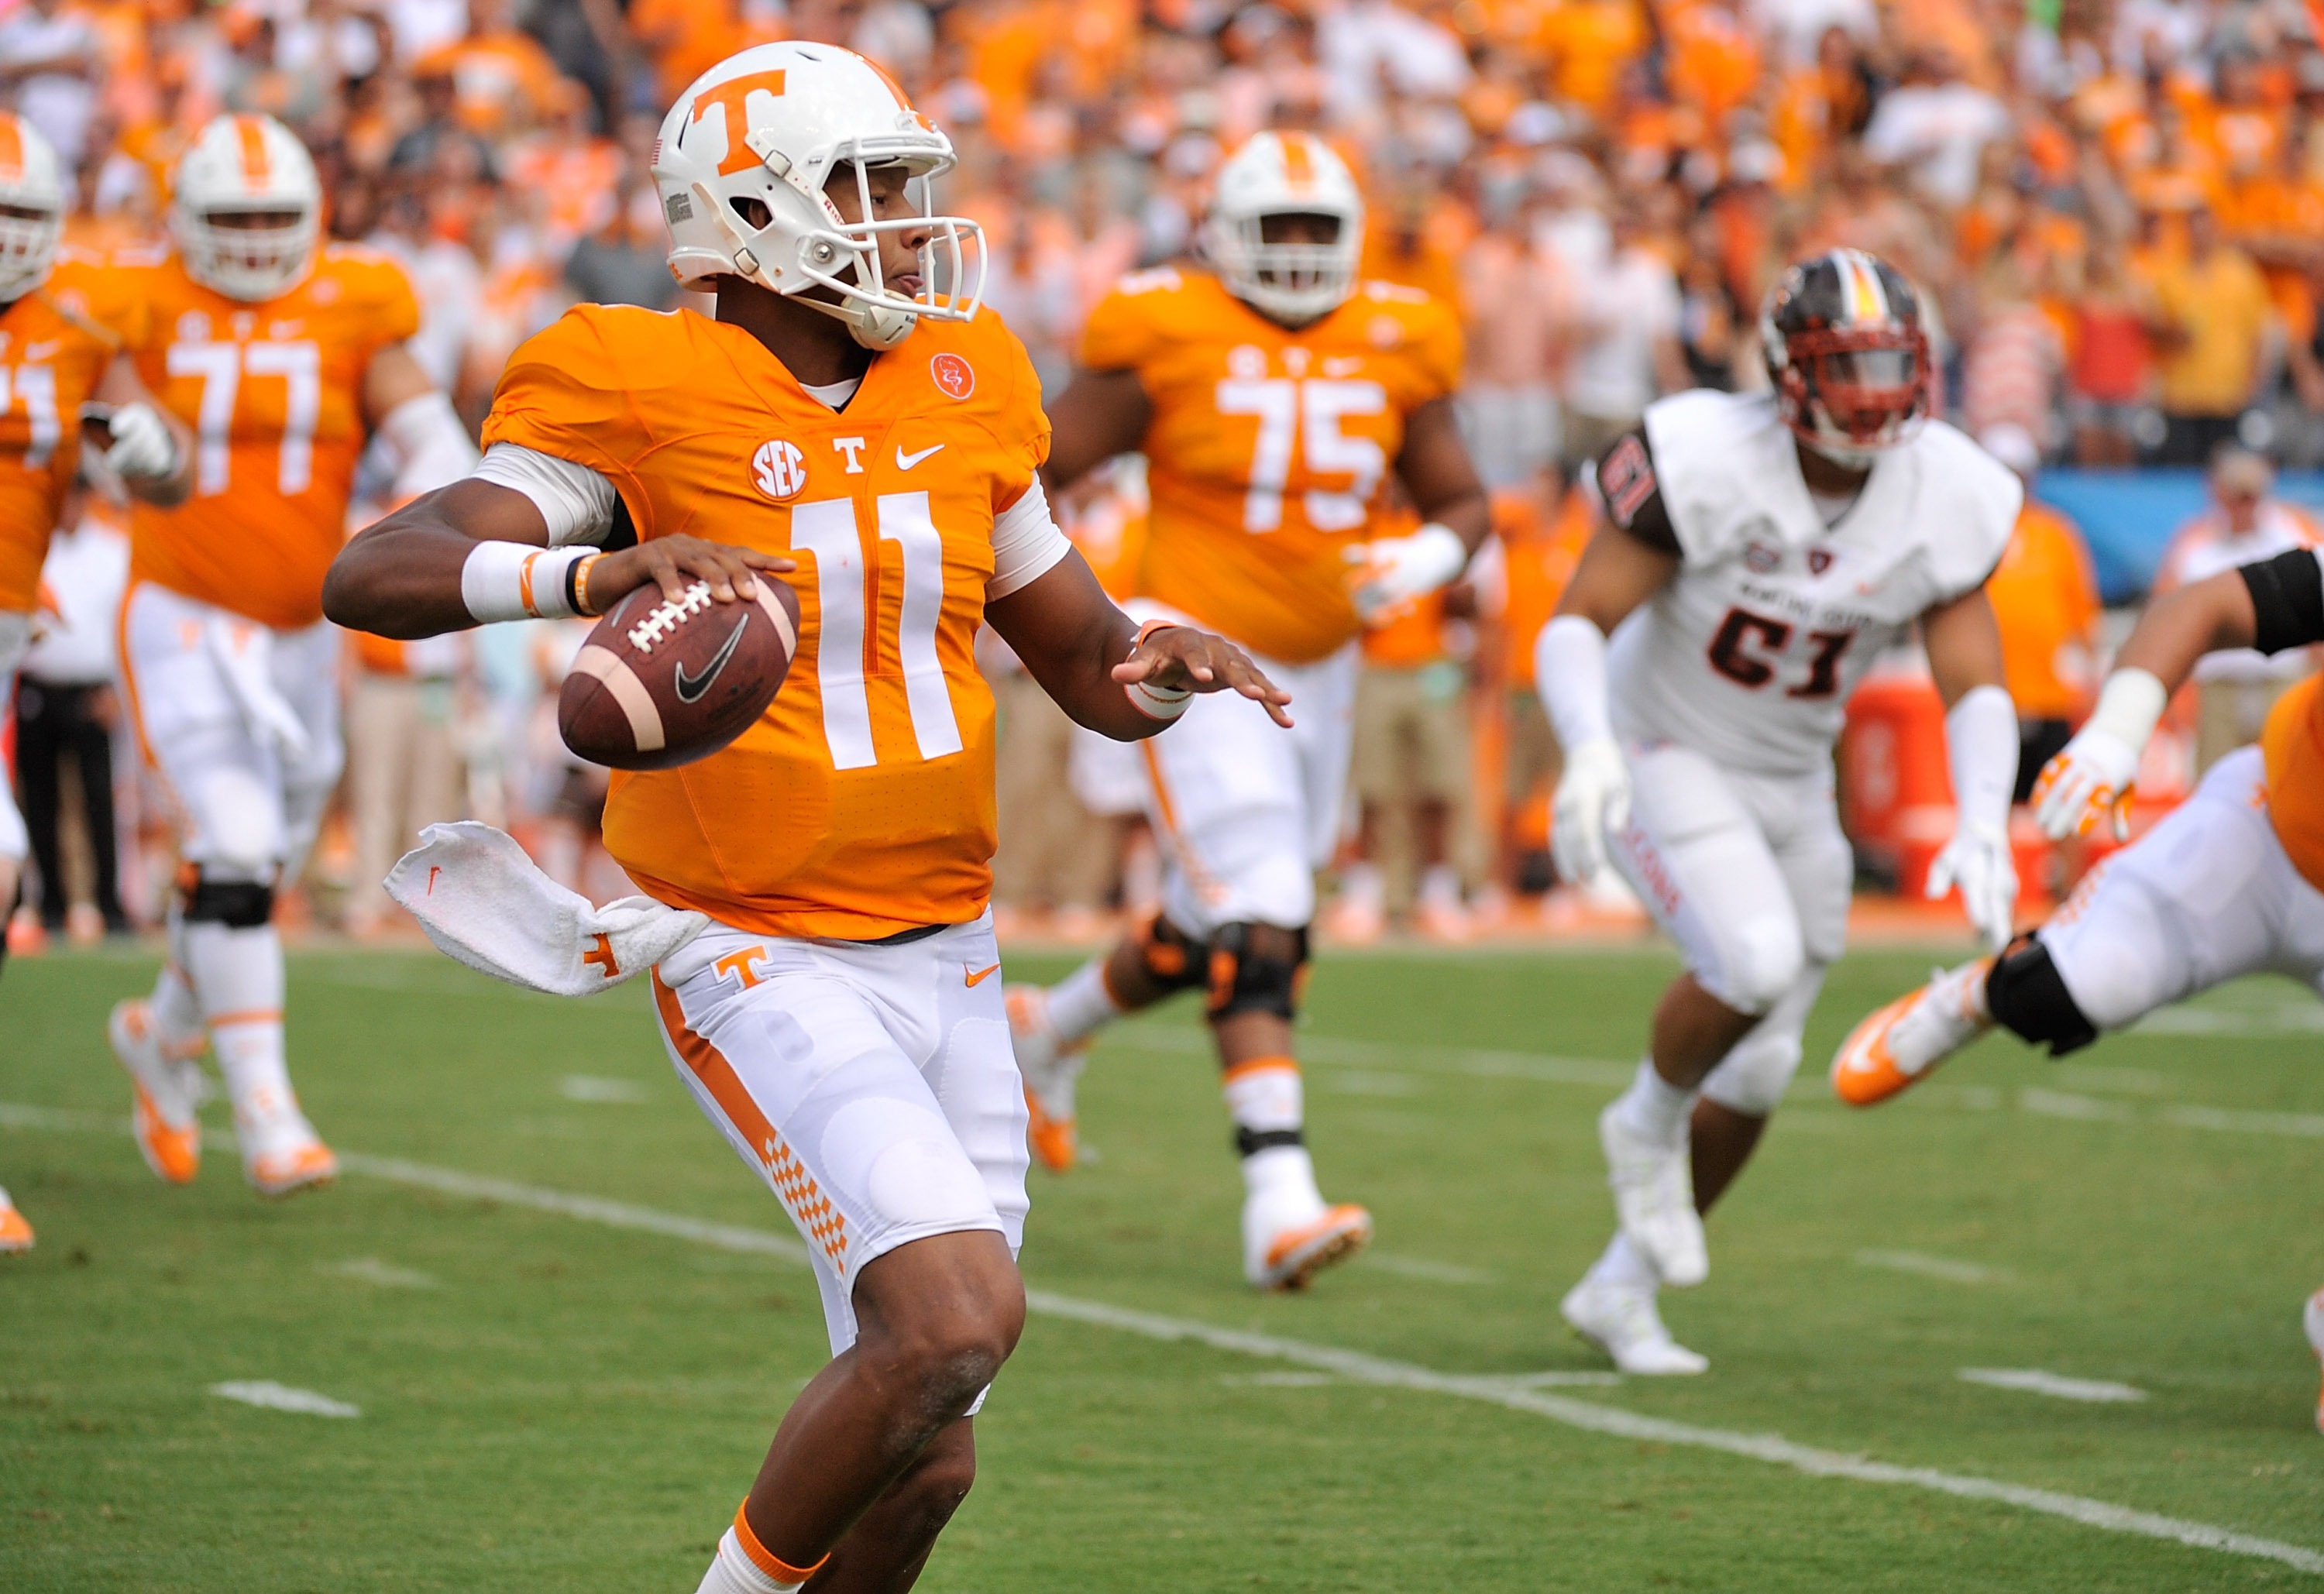 How to Watch Oklahoma vs. Tennessee Live Stream Online